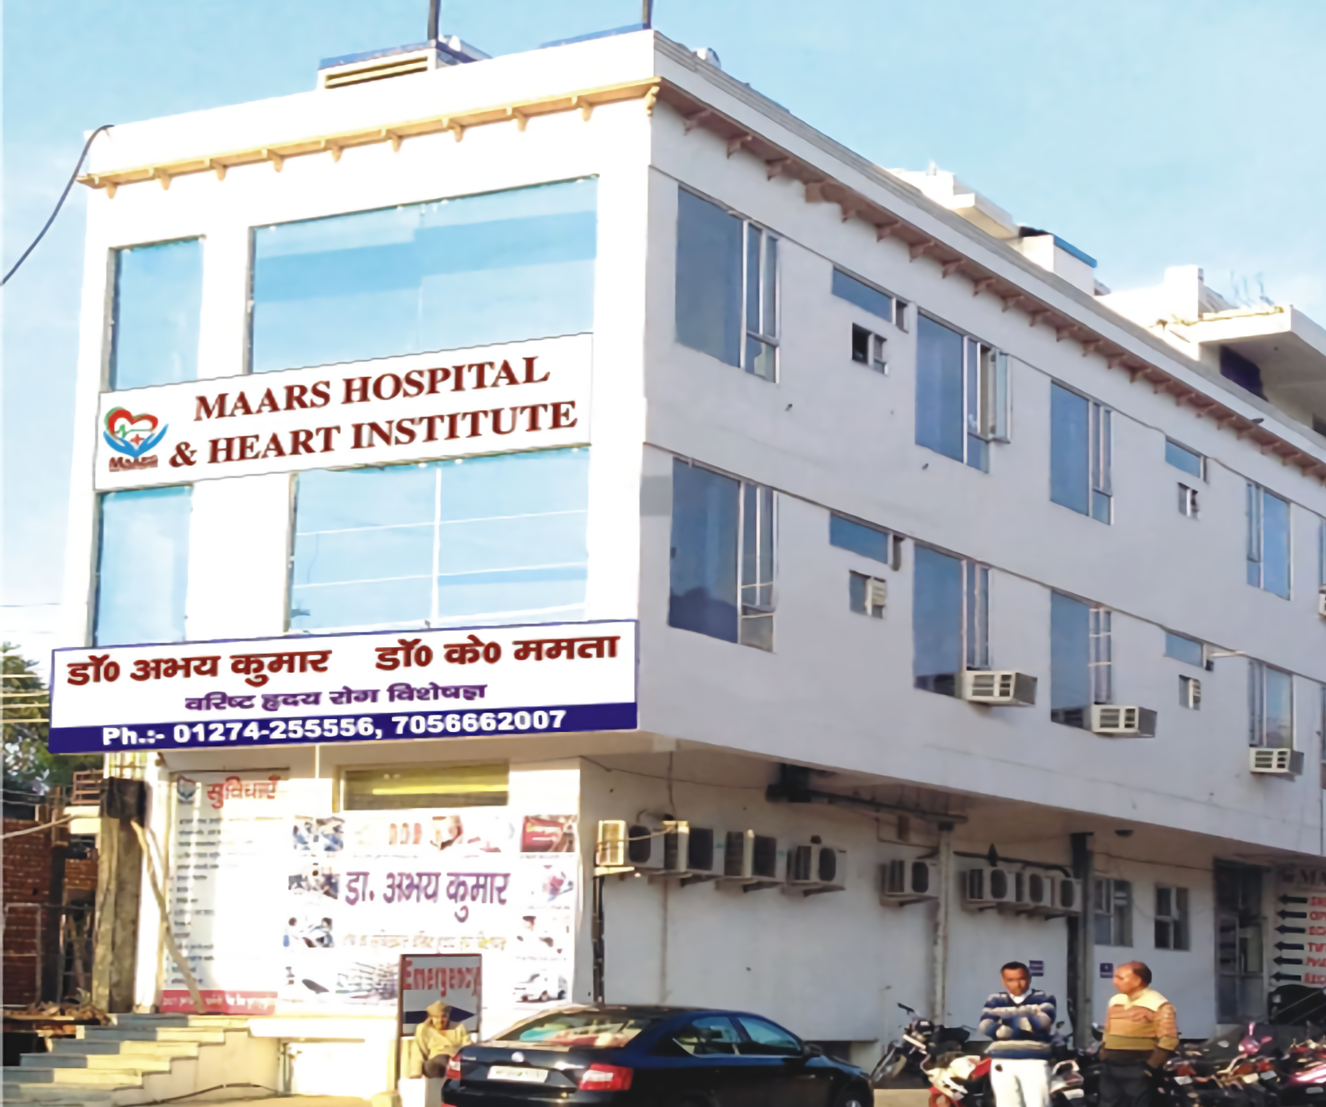 Maars Hospital And Heart Institute